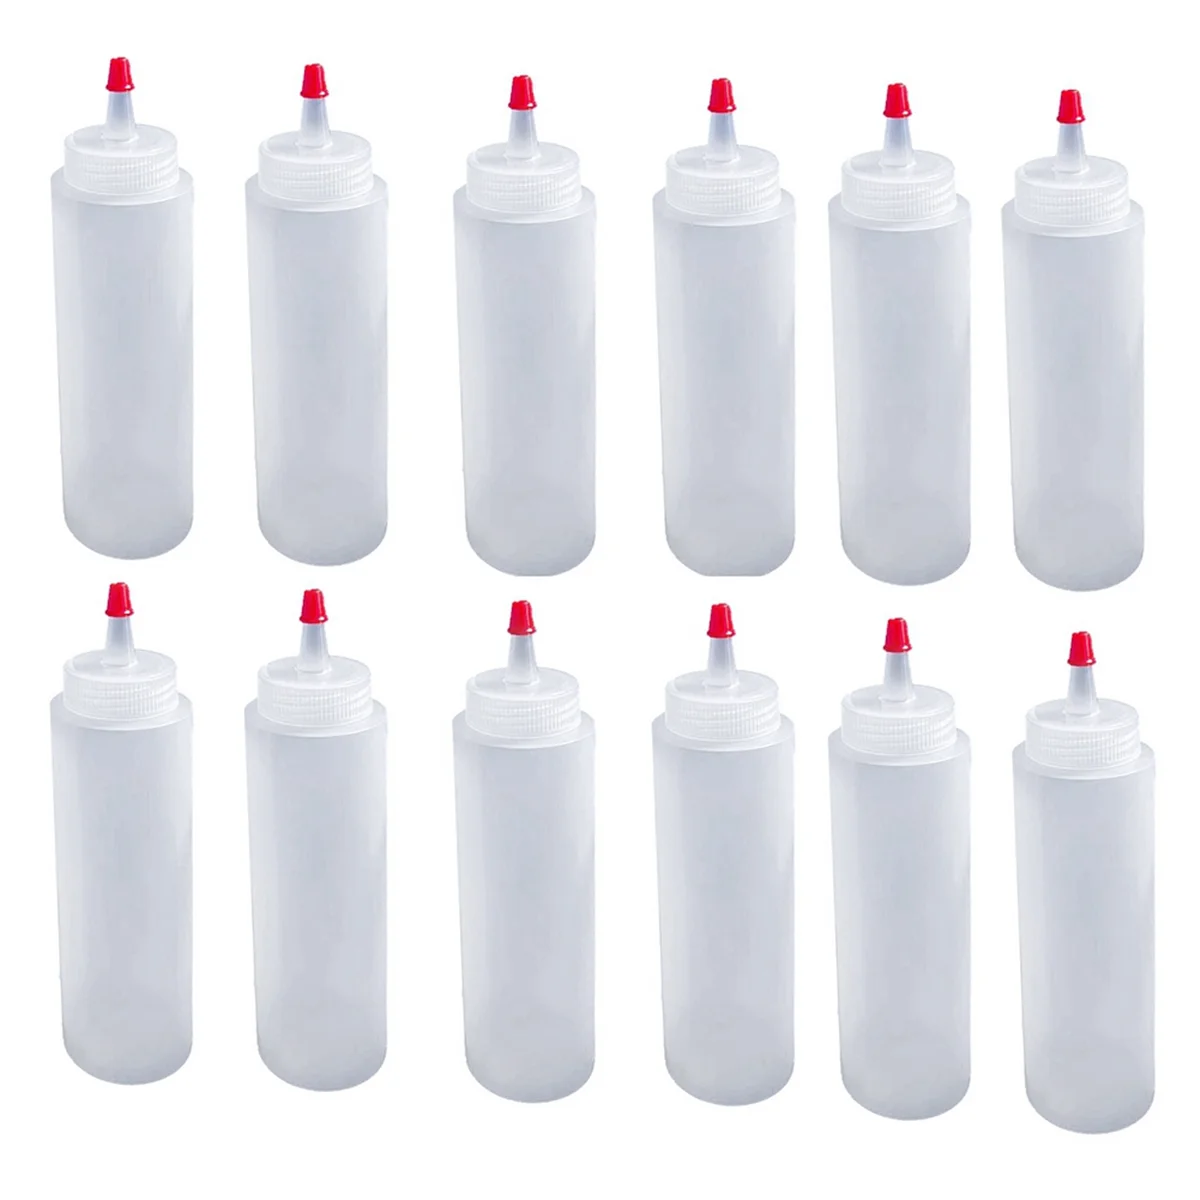 

12Pcs 16 Ounce Plastic Squeeze Condiment Bottles with Red Tip Cap Squirt Bottle for Ketchup,BBQ, Sauces, Arts and Crafts